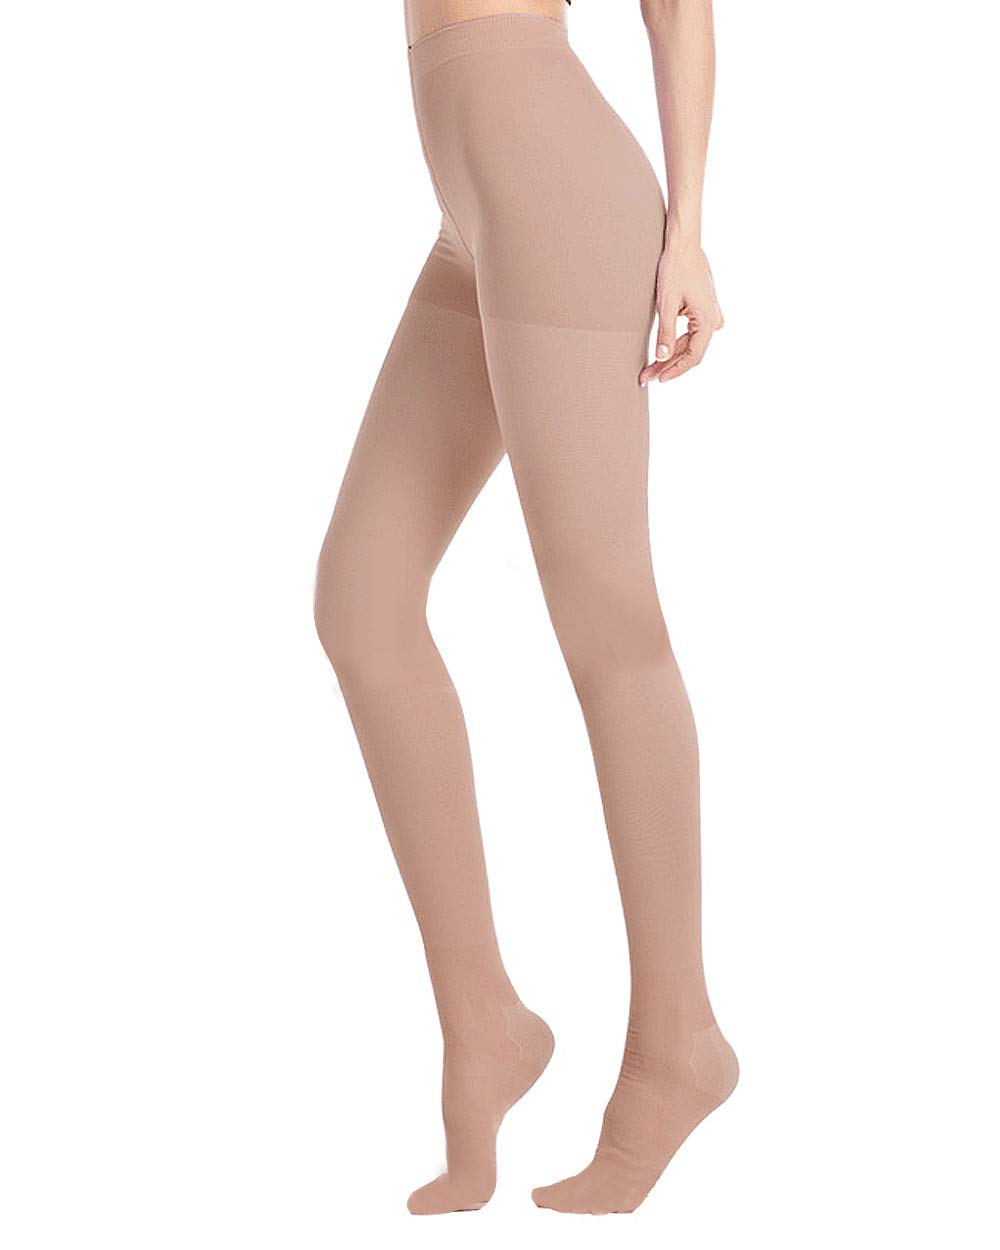 Slimming Compression Footless Tights - 3 Pair Pack